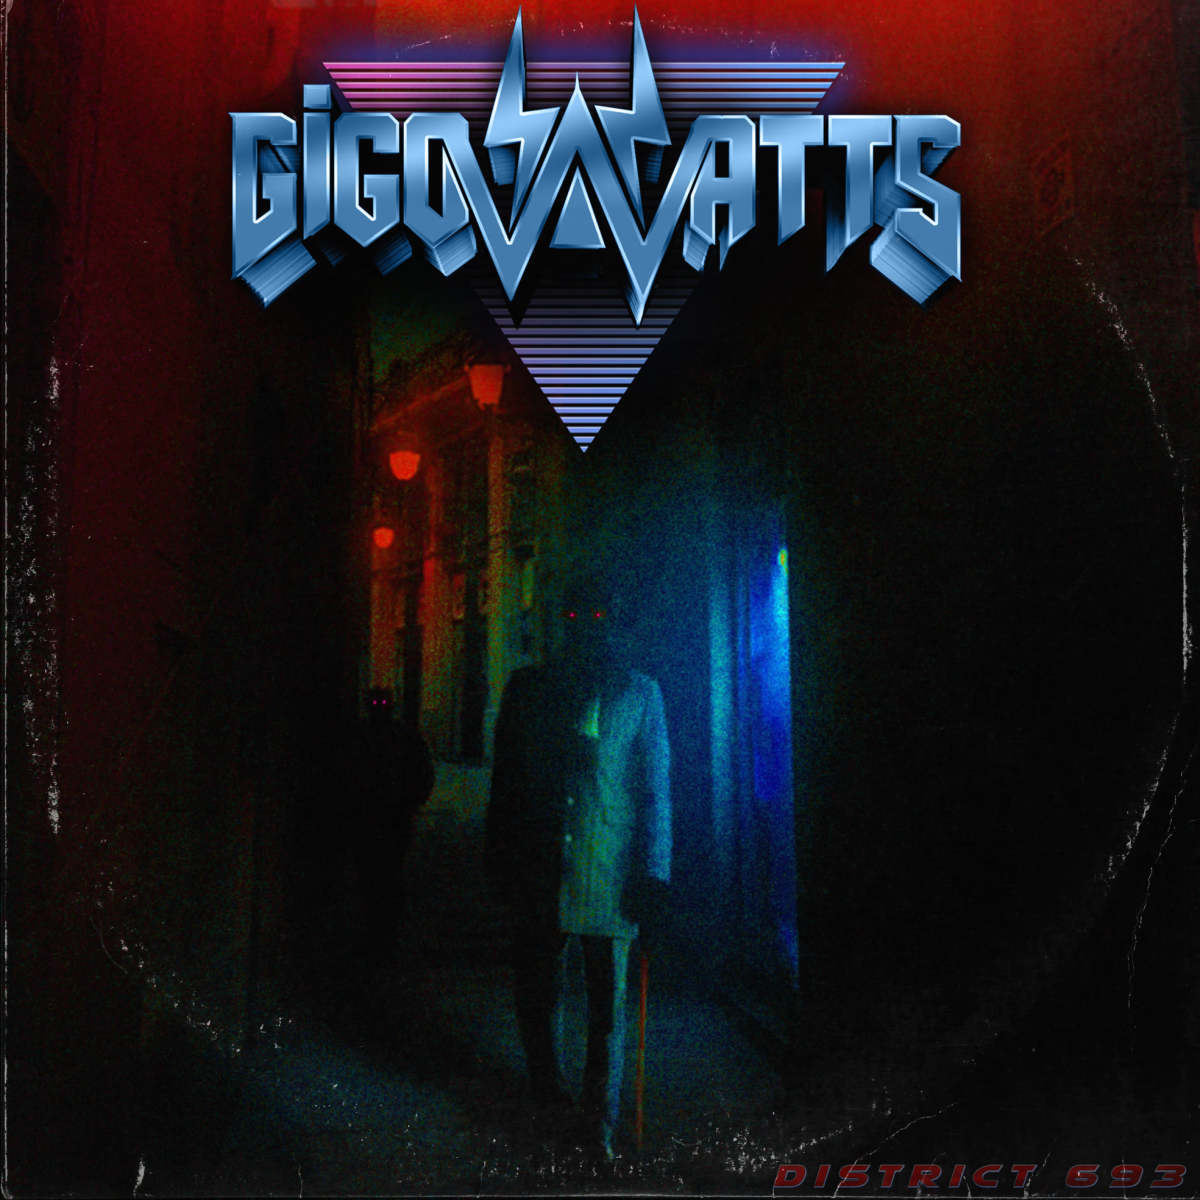 synth-album-review-district-693-by-gigowatts